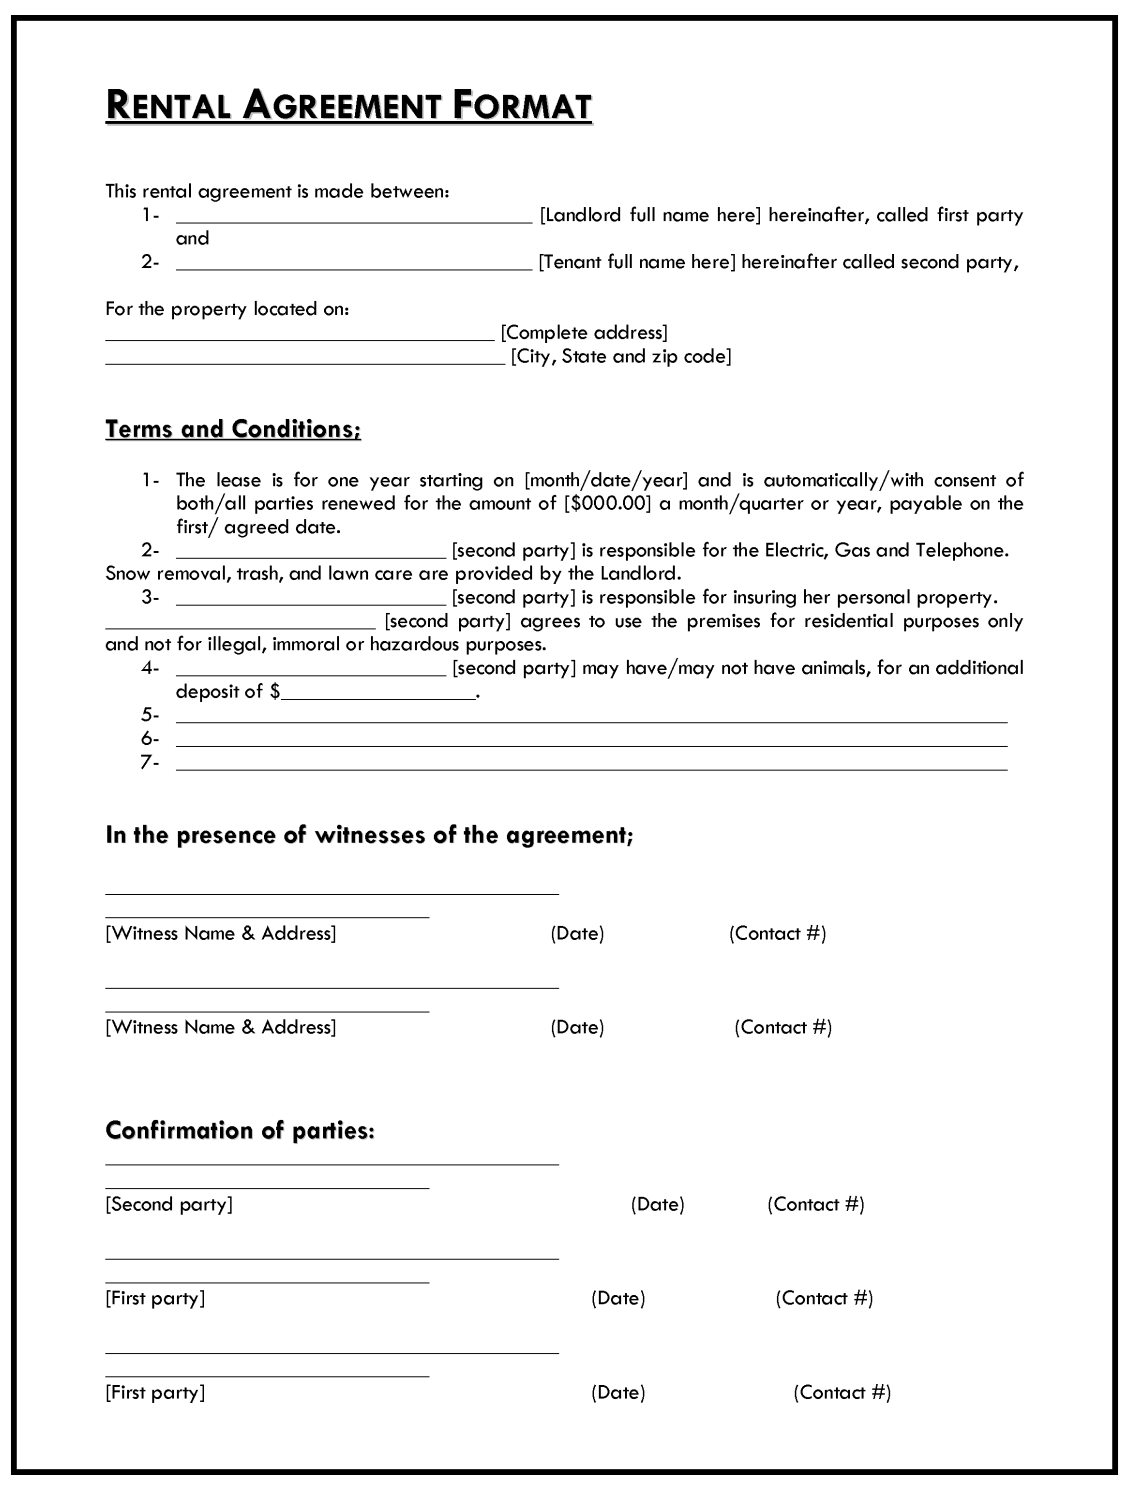 free-rent-agreement-letter-16-rental-agreement-letter-templates-word